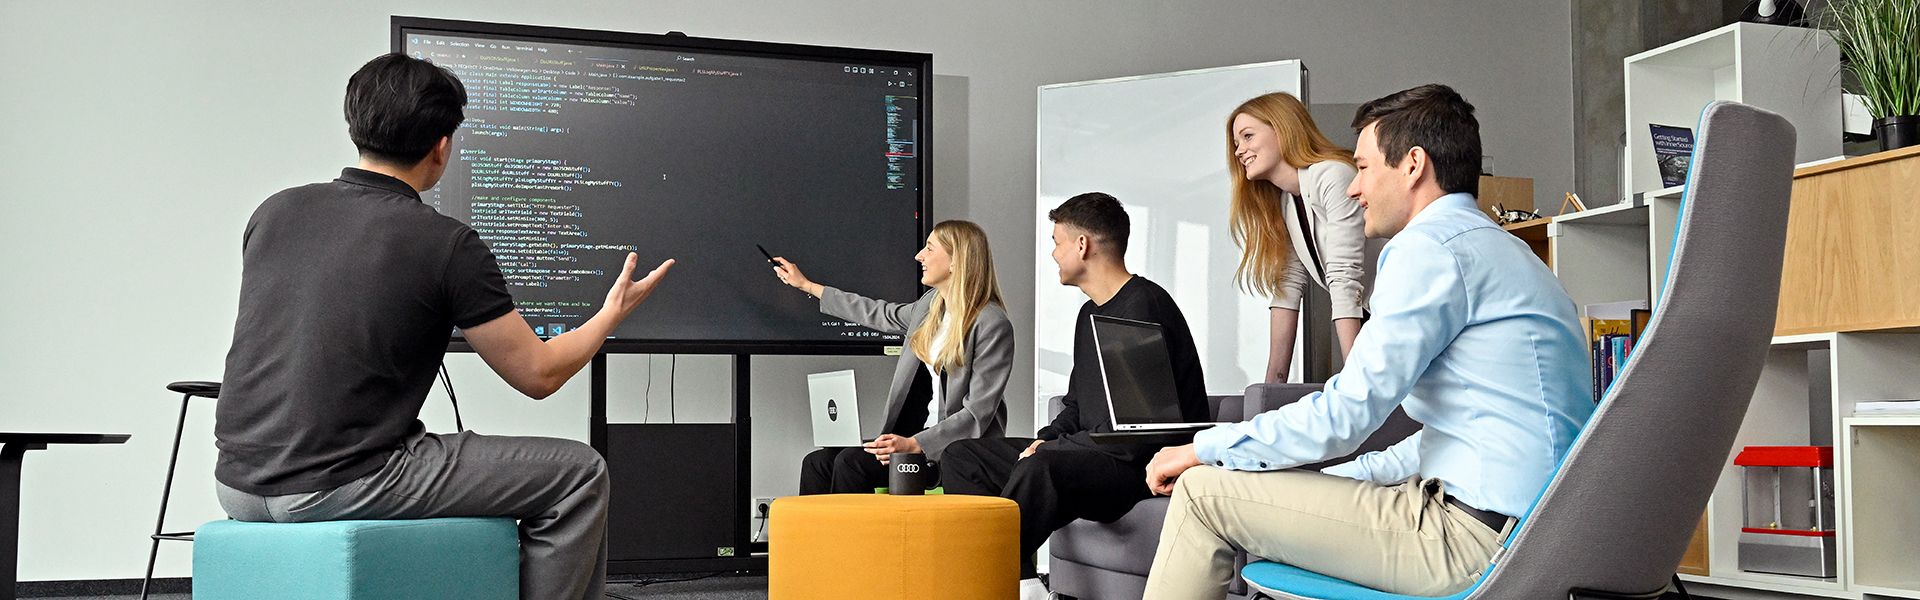 Five Audi employees are talking and looking at something on a screen